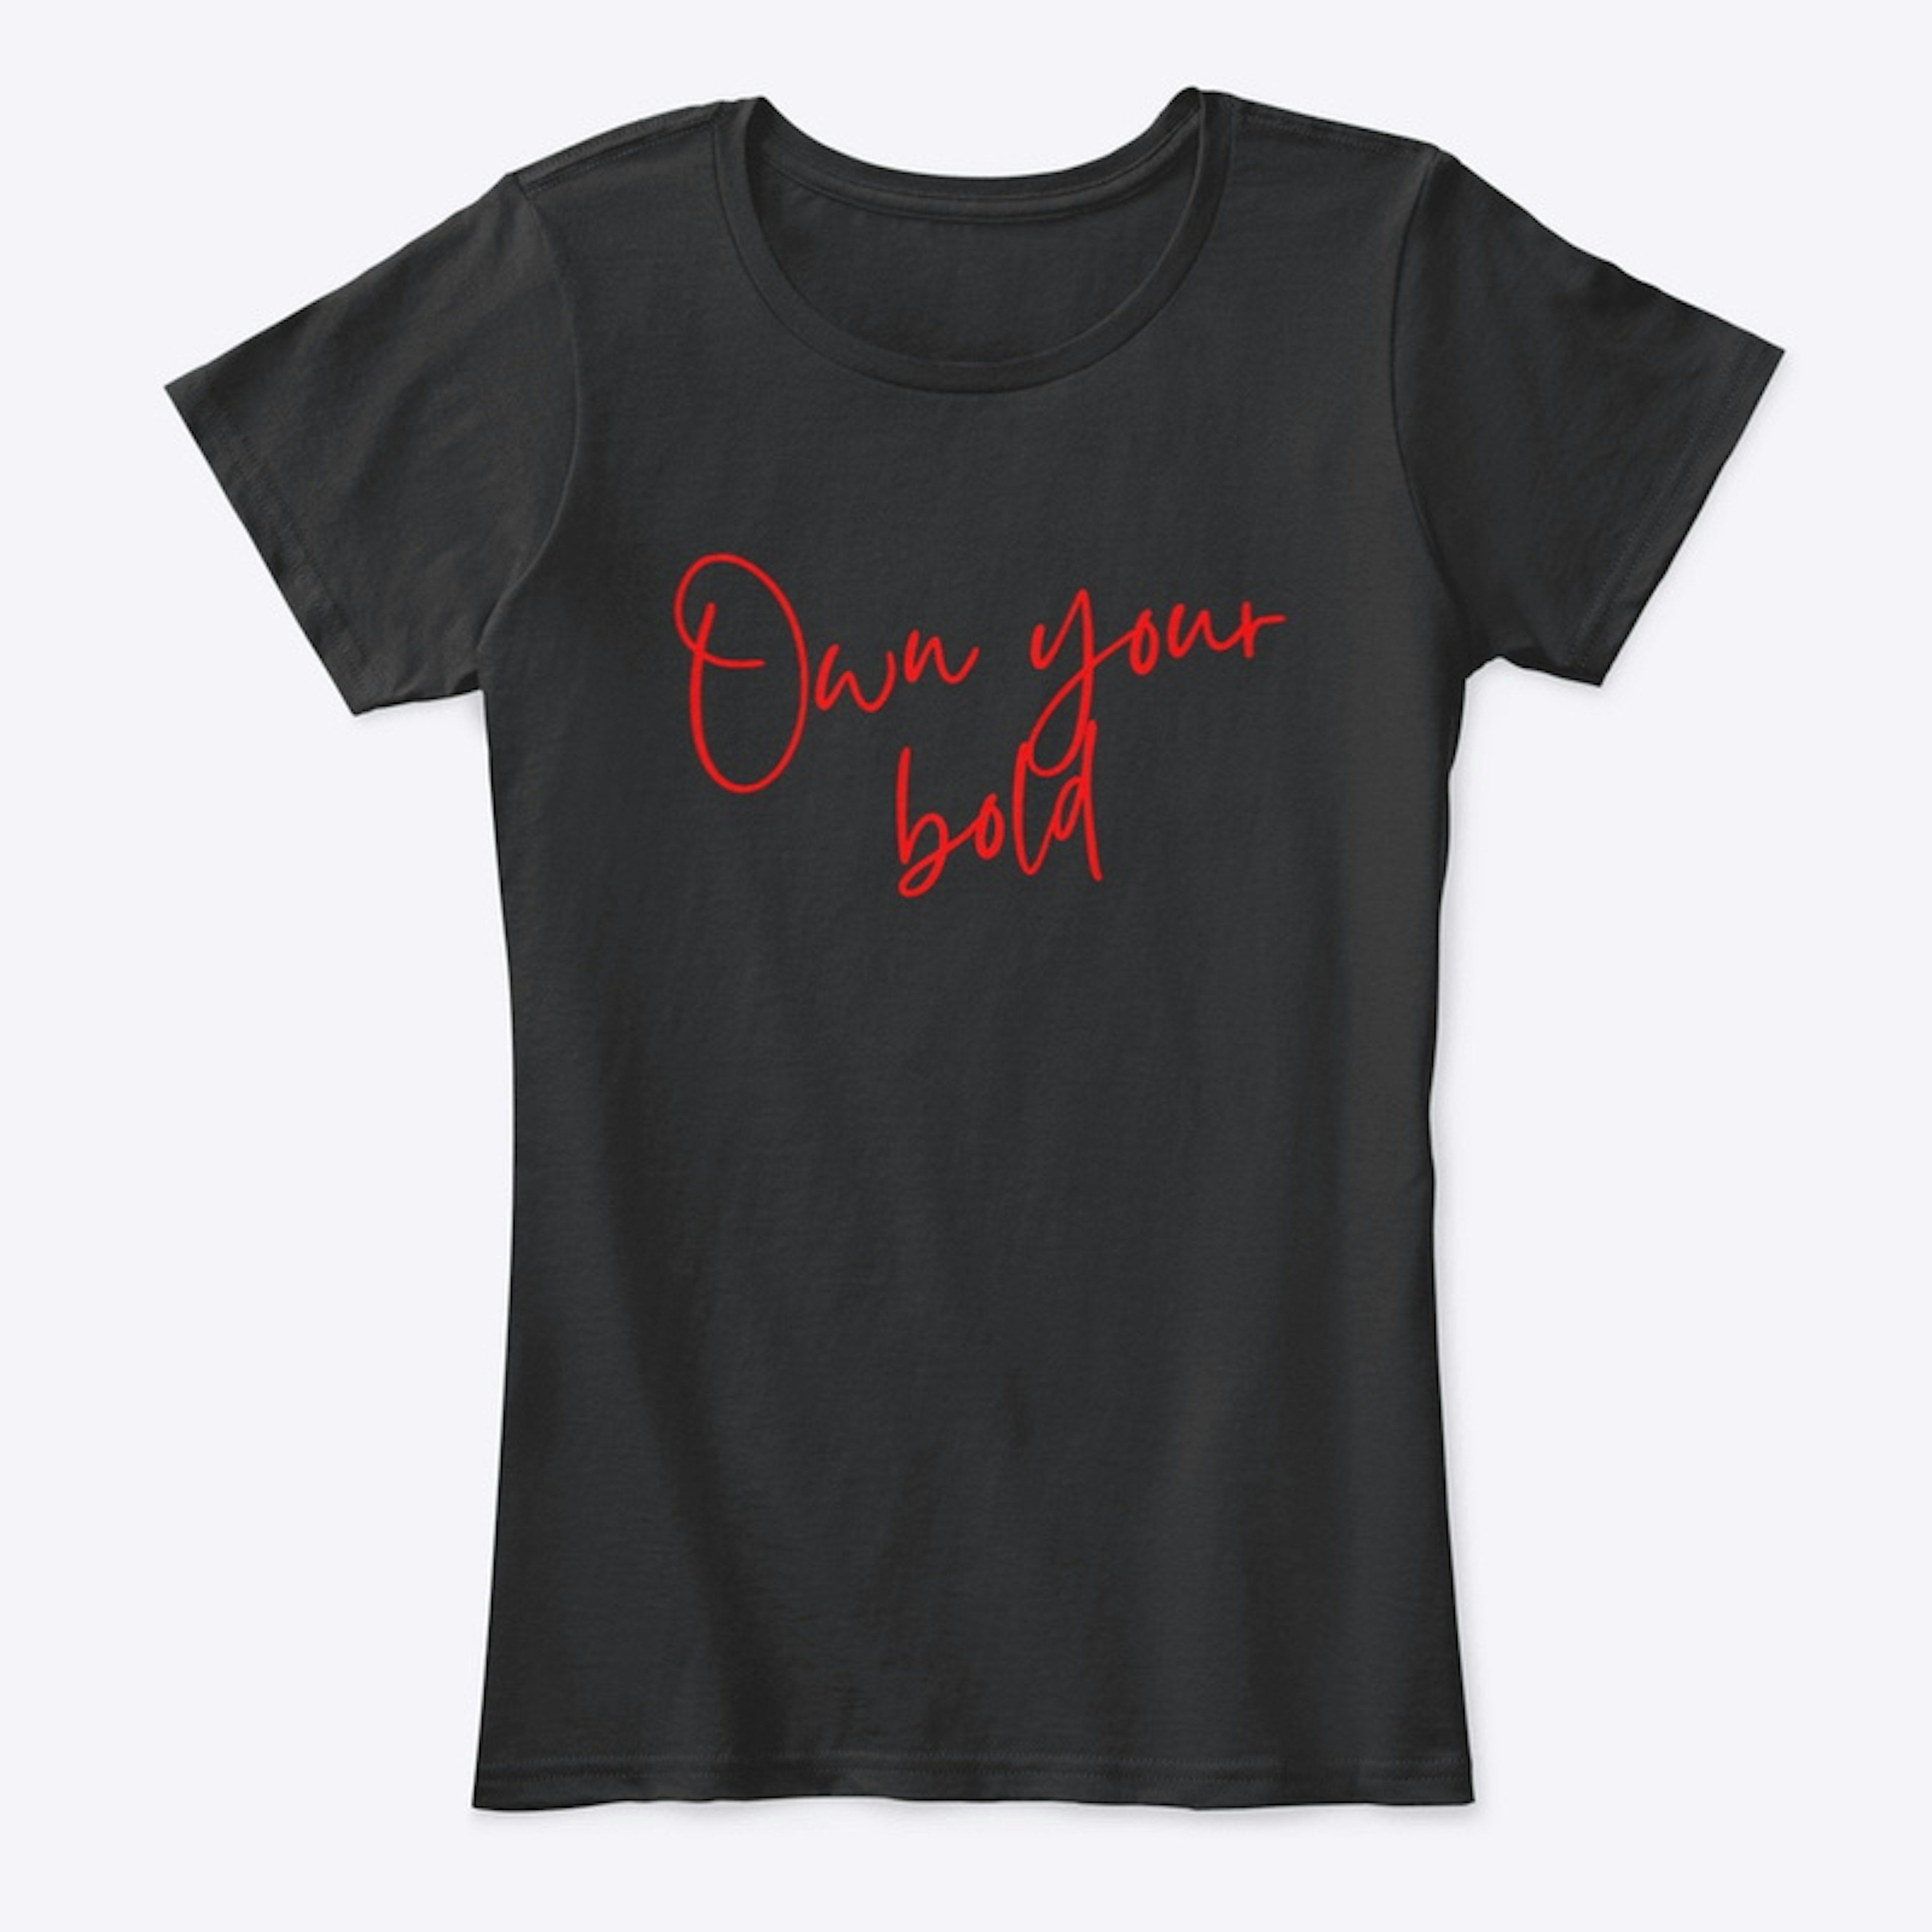 own your bold, by Kim